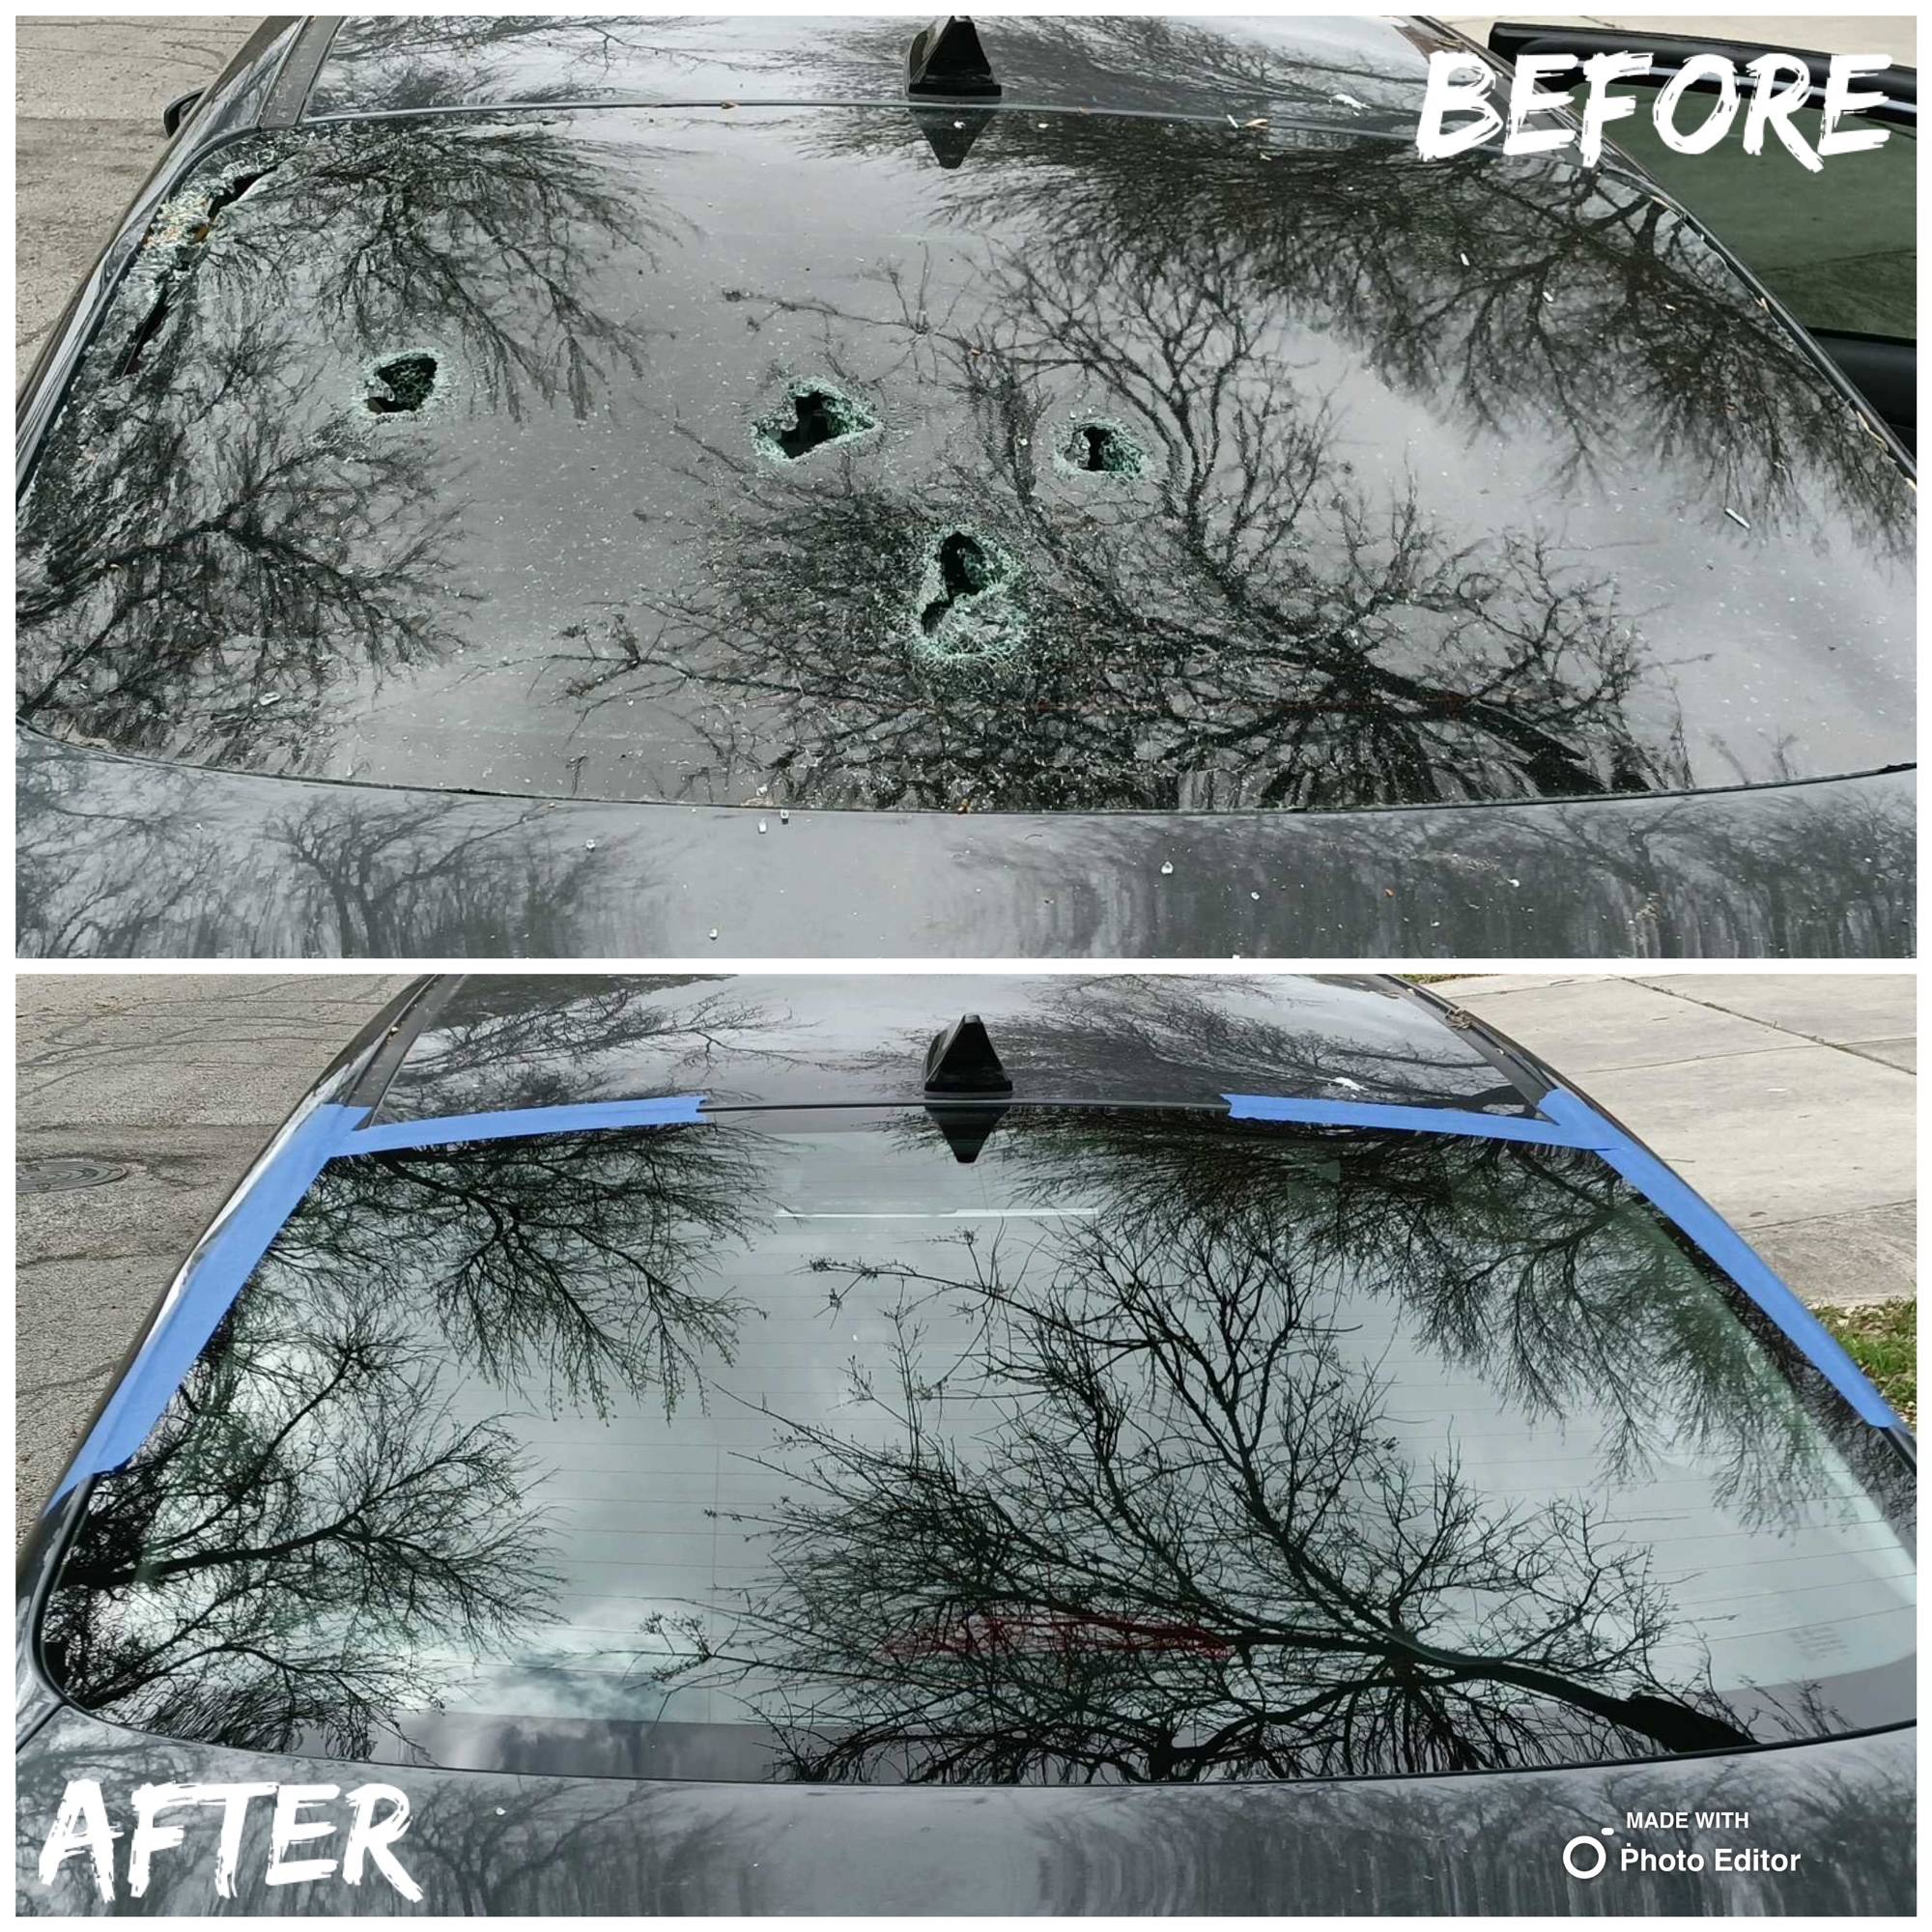 Before and after images of a sedan's dark tinted rear windshield, with the top image showing the damaged glass with 4 puncture holes from vandalism and the bottom image presenting the repaired glass in Northwest San Antonio, Texas.